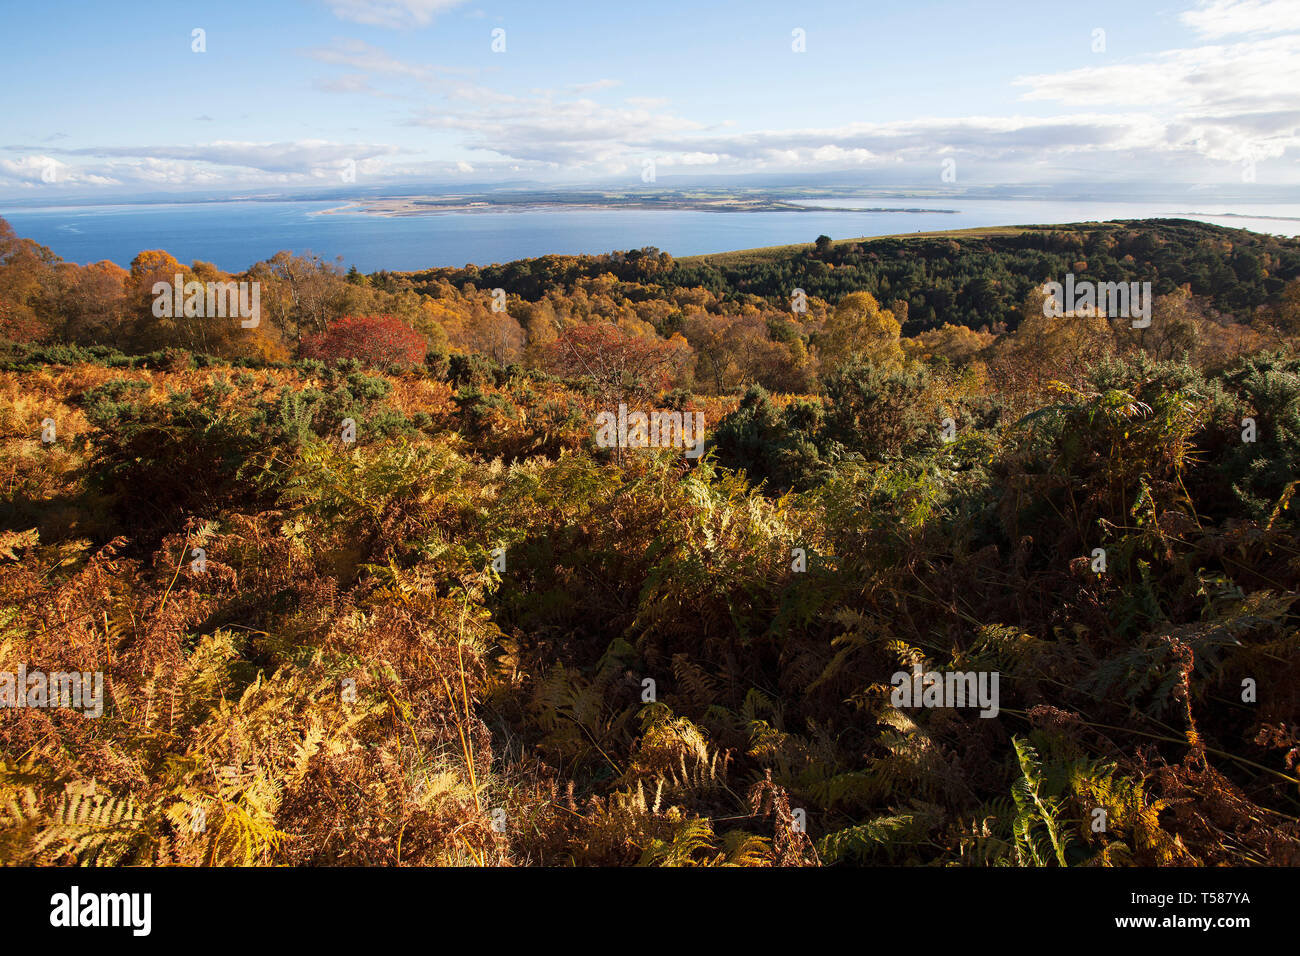 View over Moray Firth from the road to Killen Black Isle Ross and Cromarty Scotland UK October 2016 Stock Photo